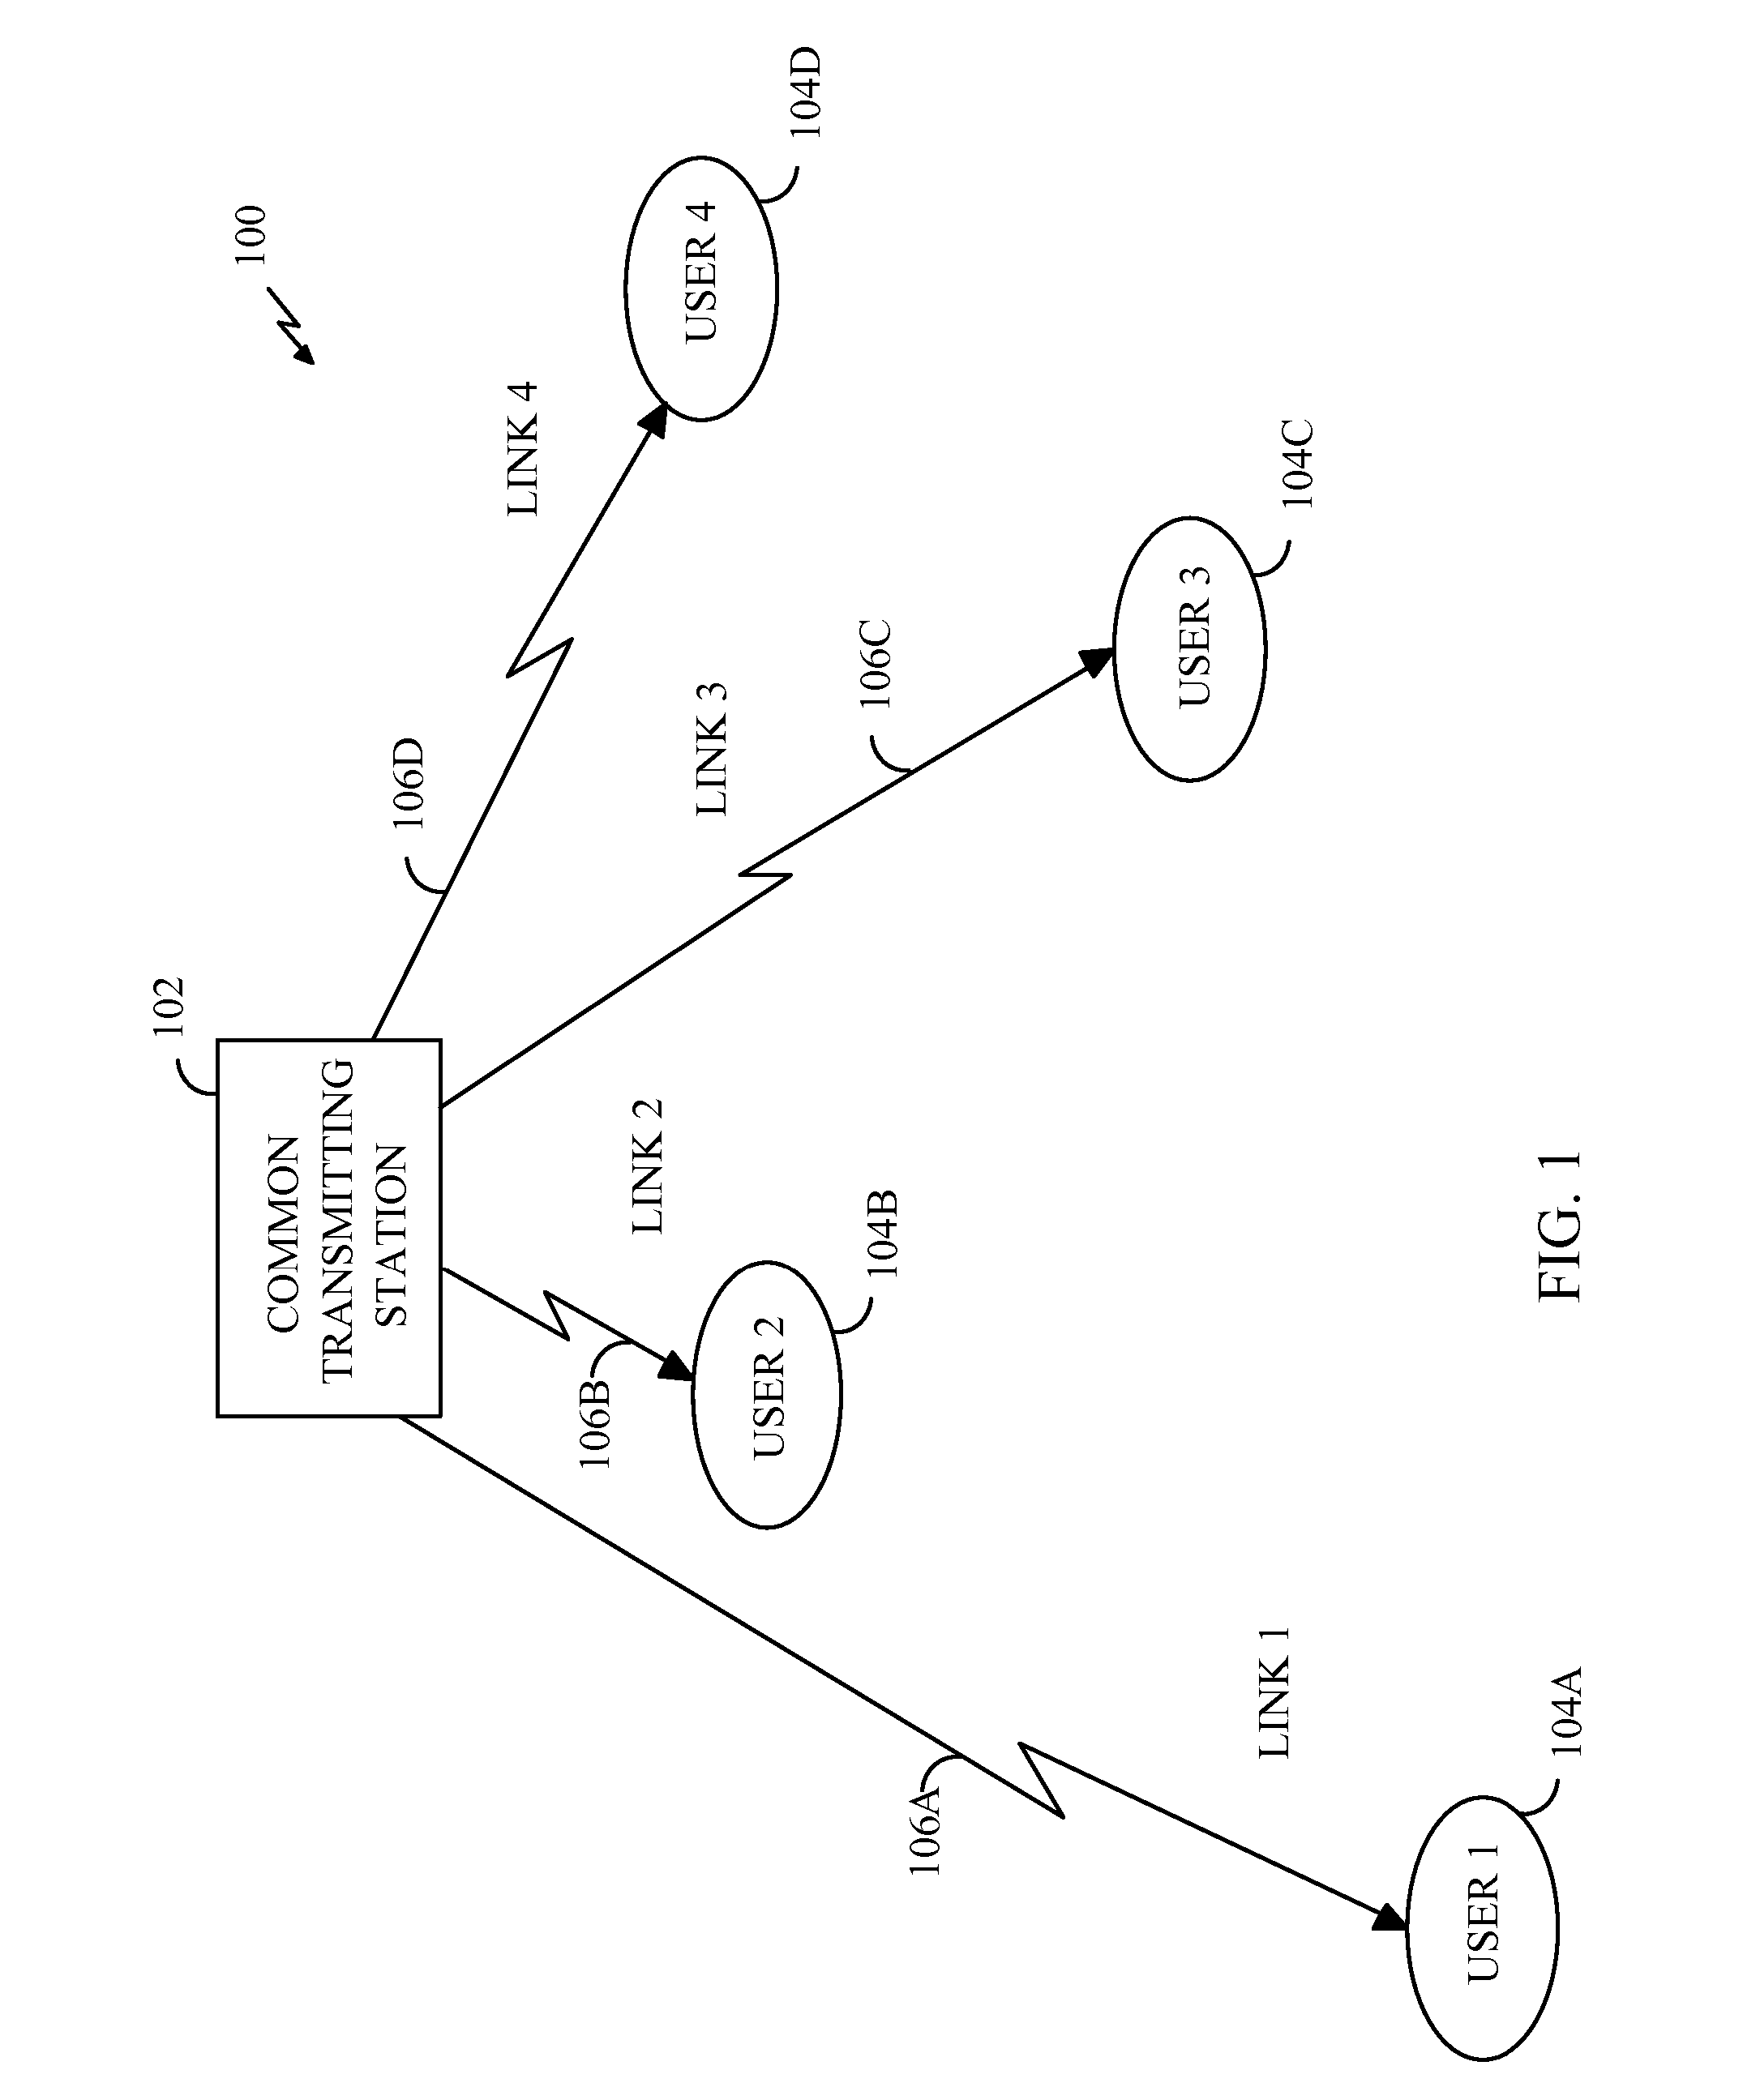 Method and System for Scheduling Data Transmission in Communication Systems